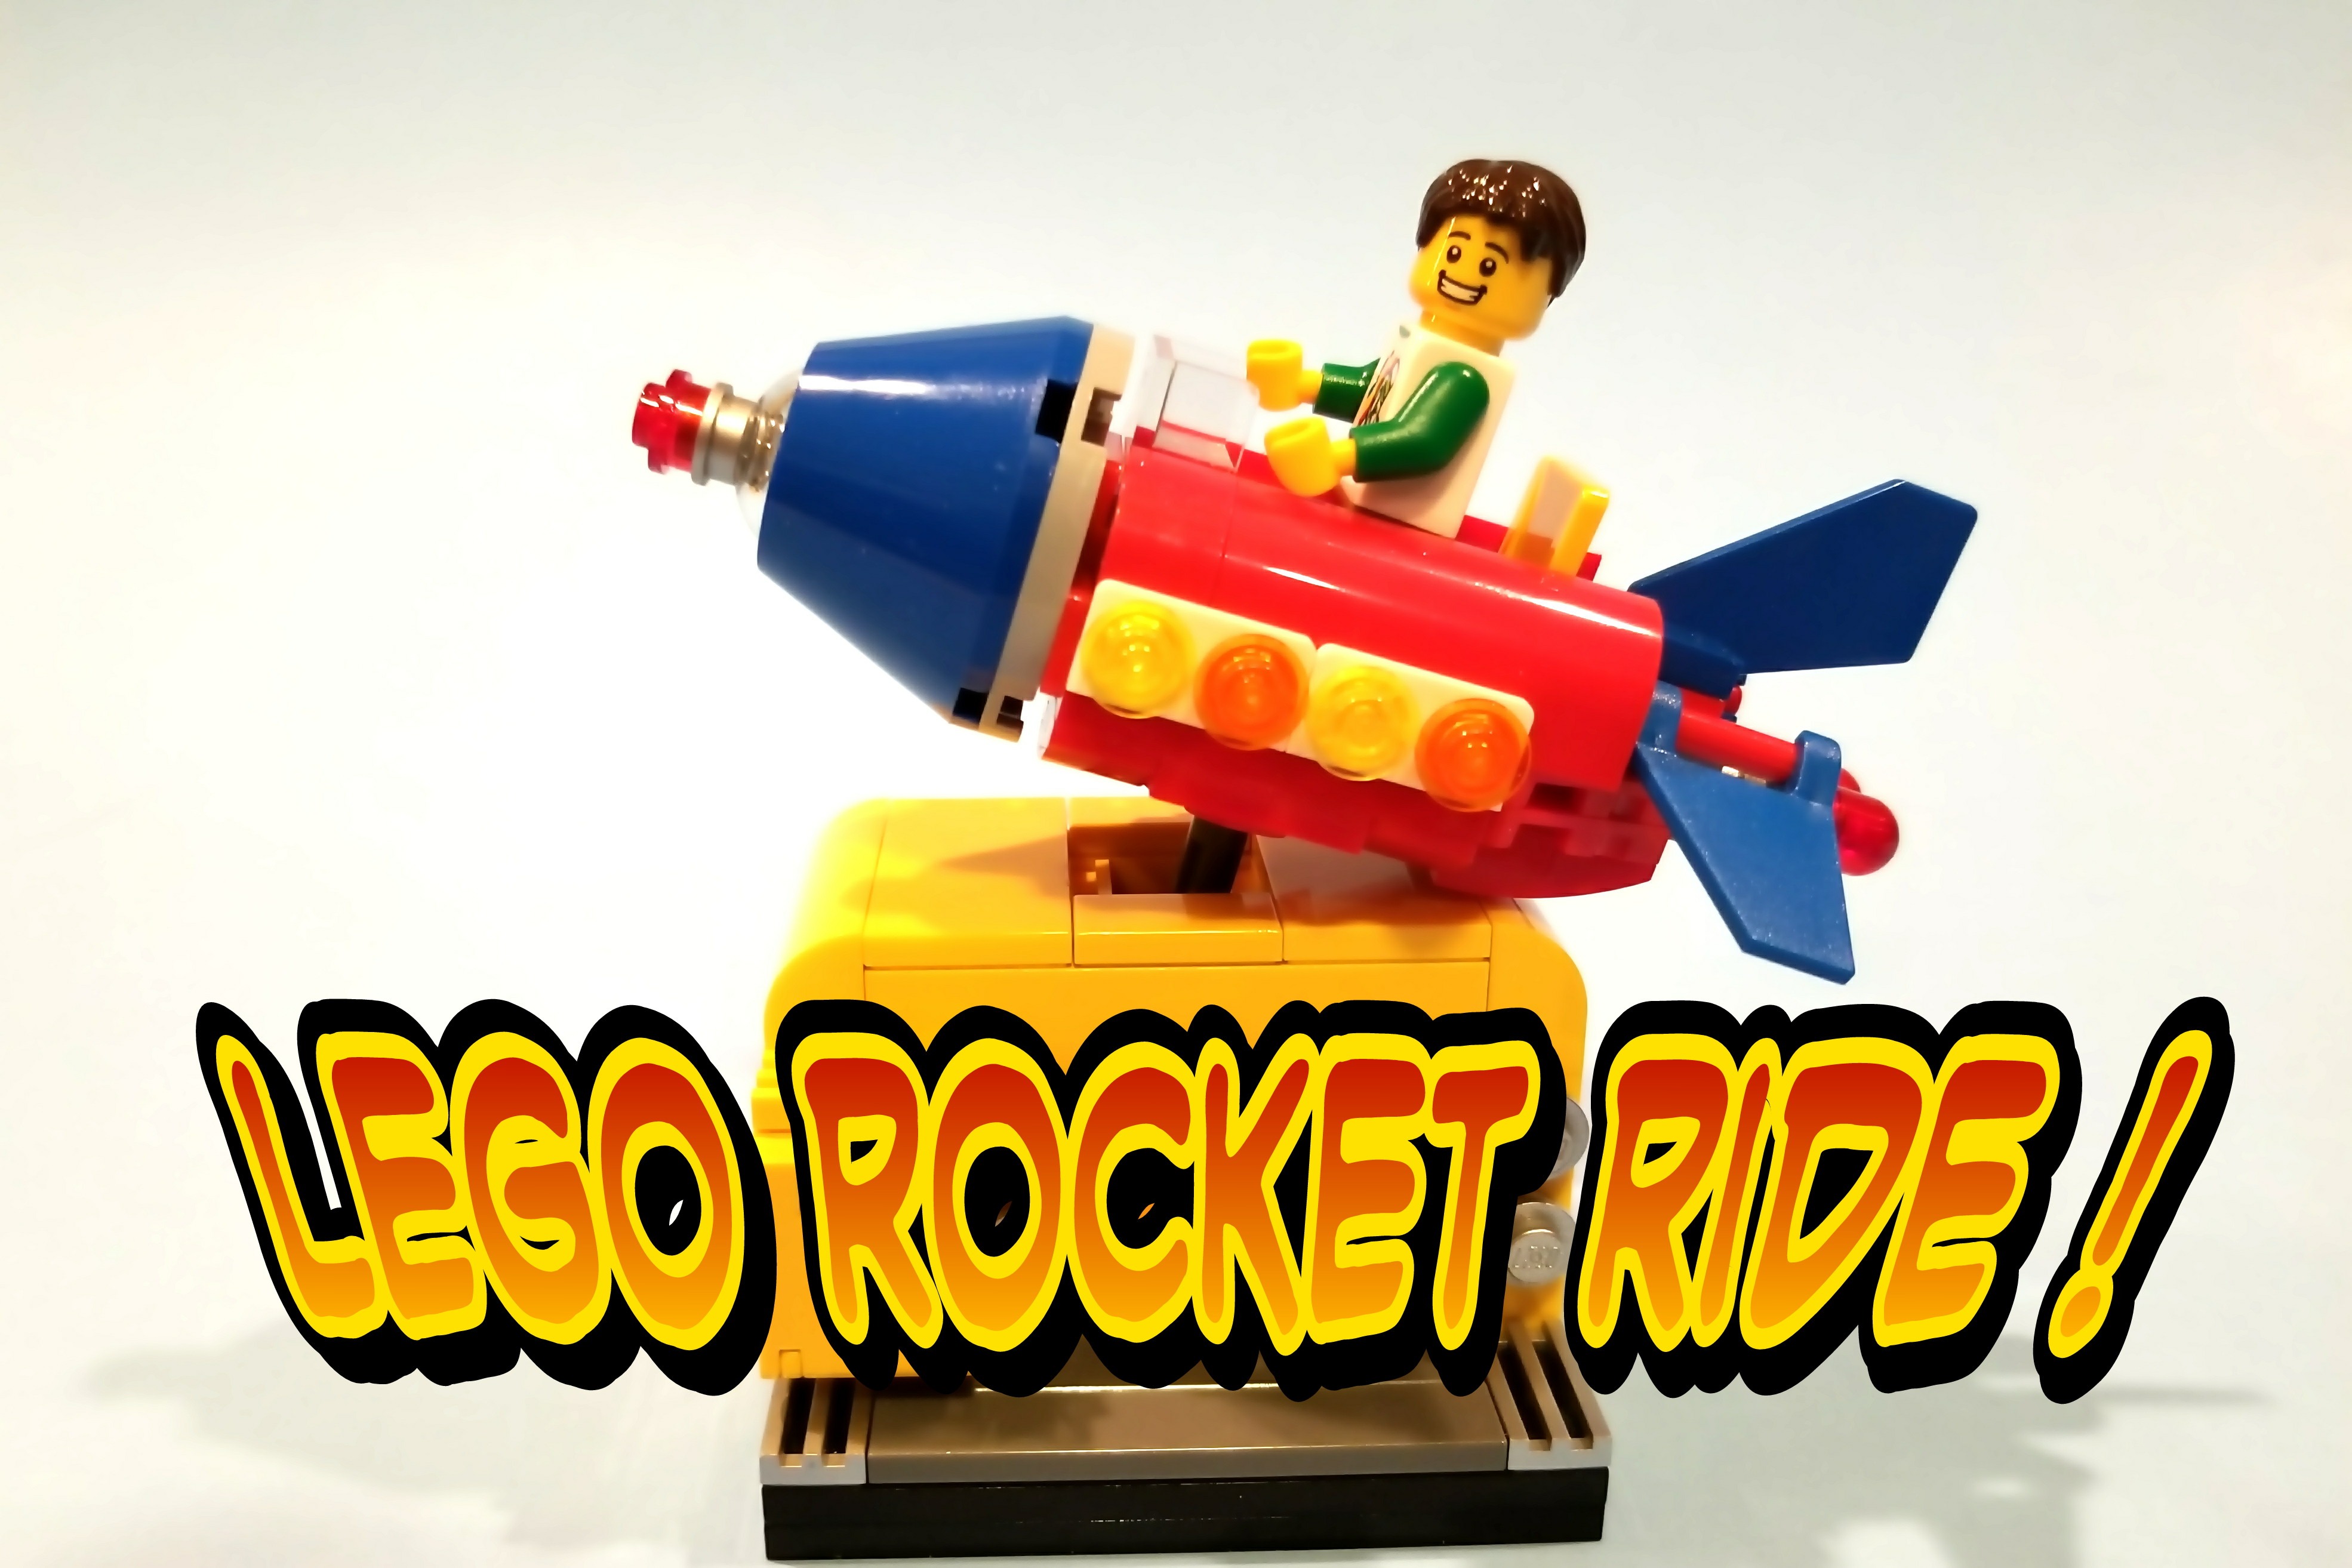 Coin Operated Rocket Ride in Lego